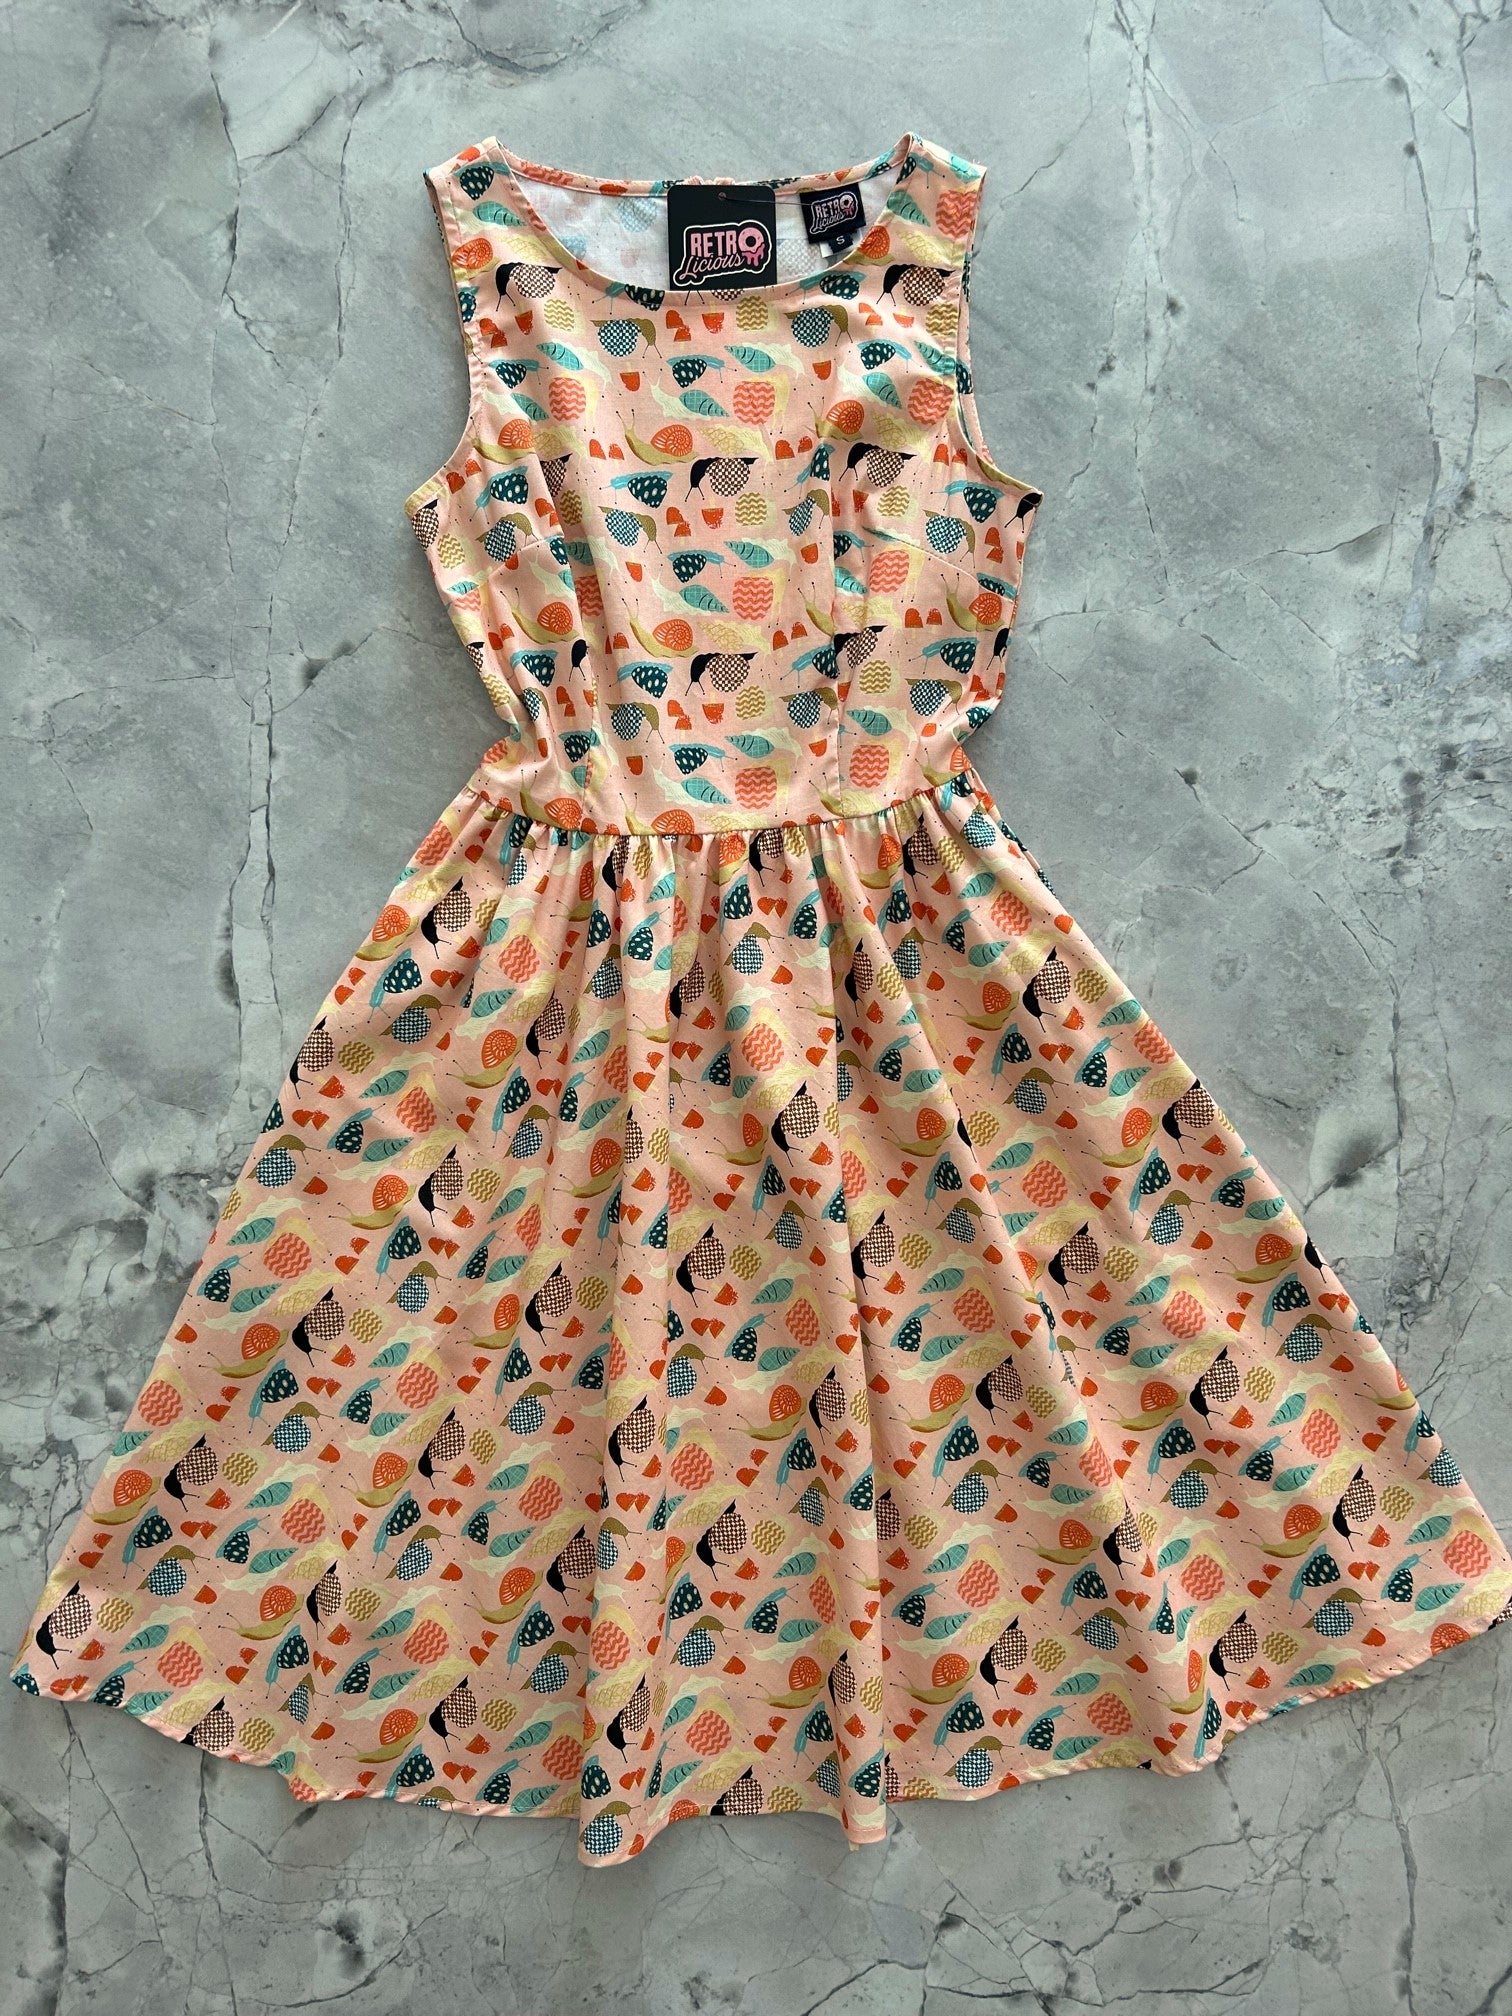 a flat lay image of our Snails Vintage Dress showing the full dress layed out flat